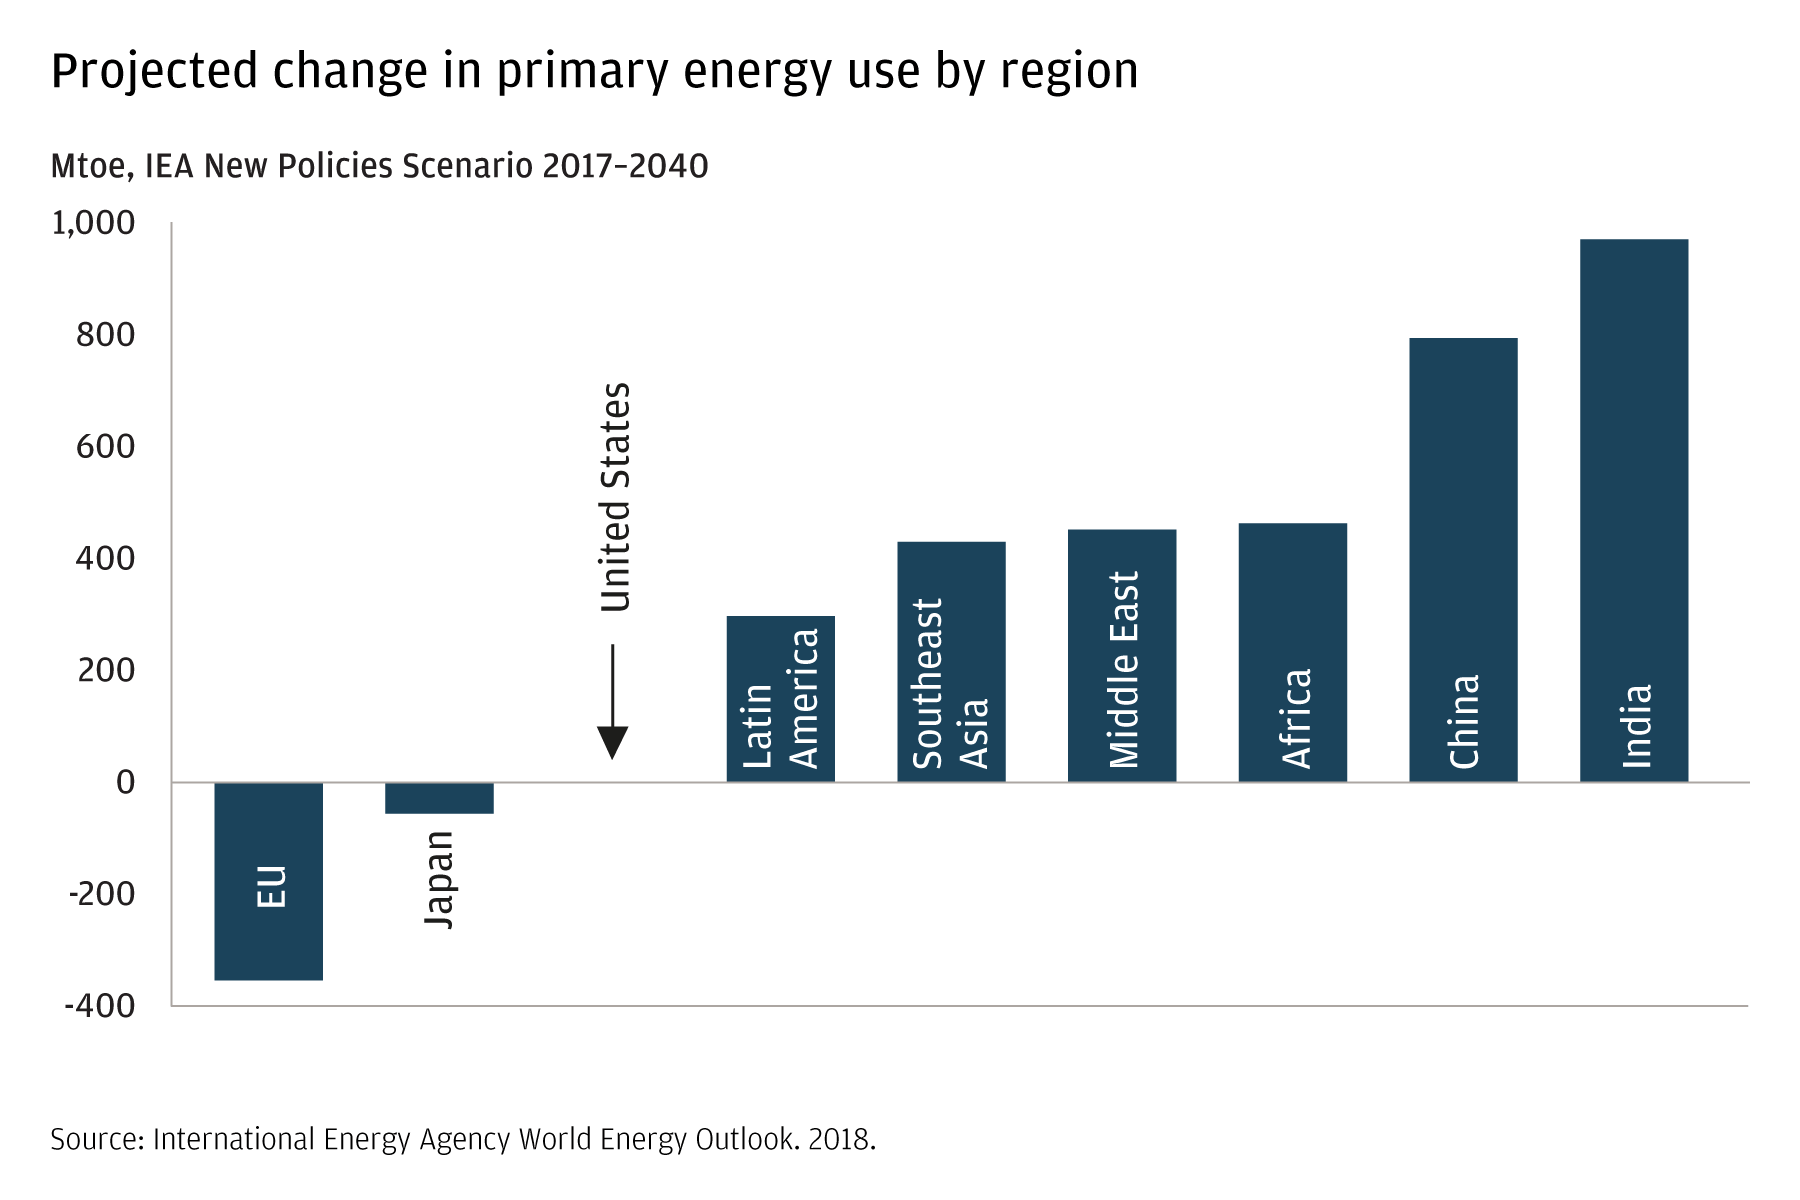 This bar chart shows that between 2017 and 2040, energy use is expected to decline in Europe and Japan, to remain unchanged in the United States, and to increase in other regions the world. India and China are projected to experience the most growth, trailed by Africa, the Middle East, Southeast Asia, and Latin America. 